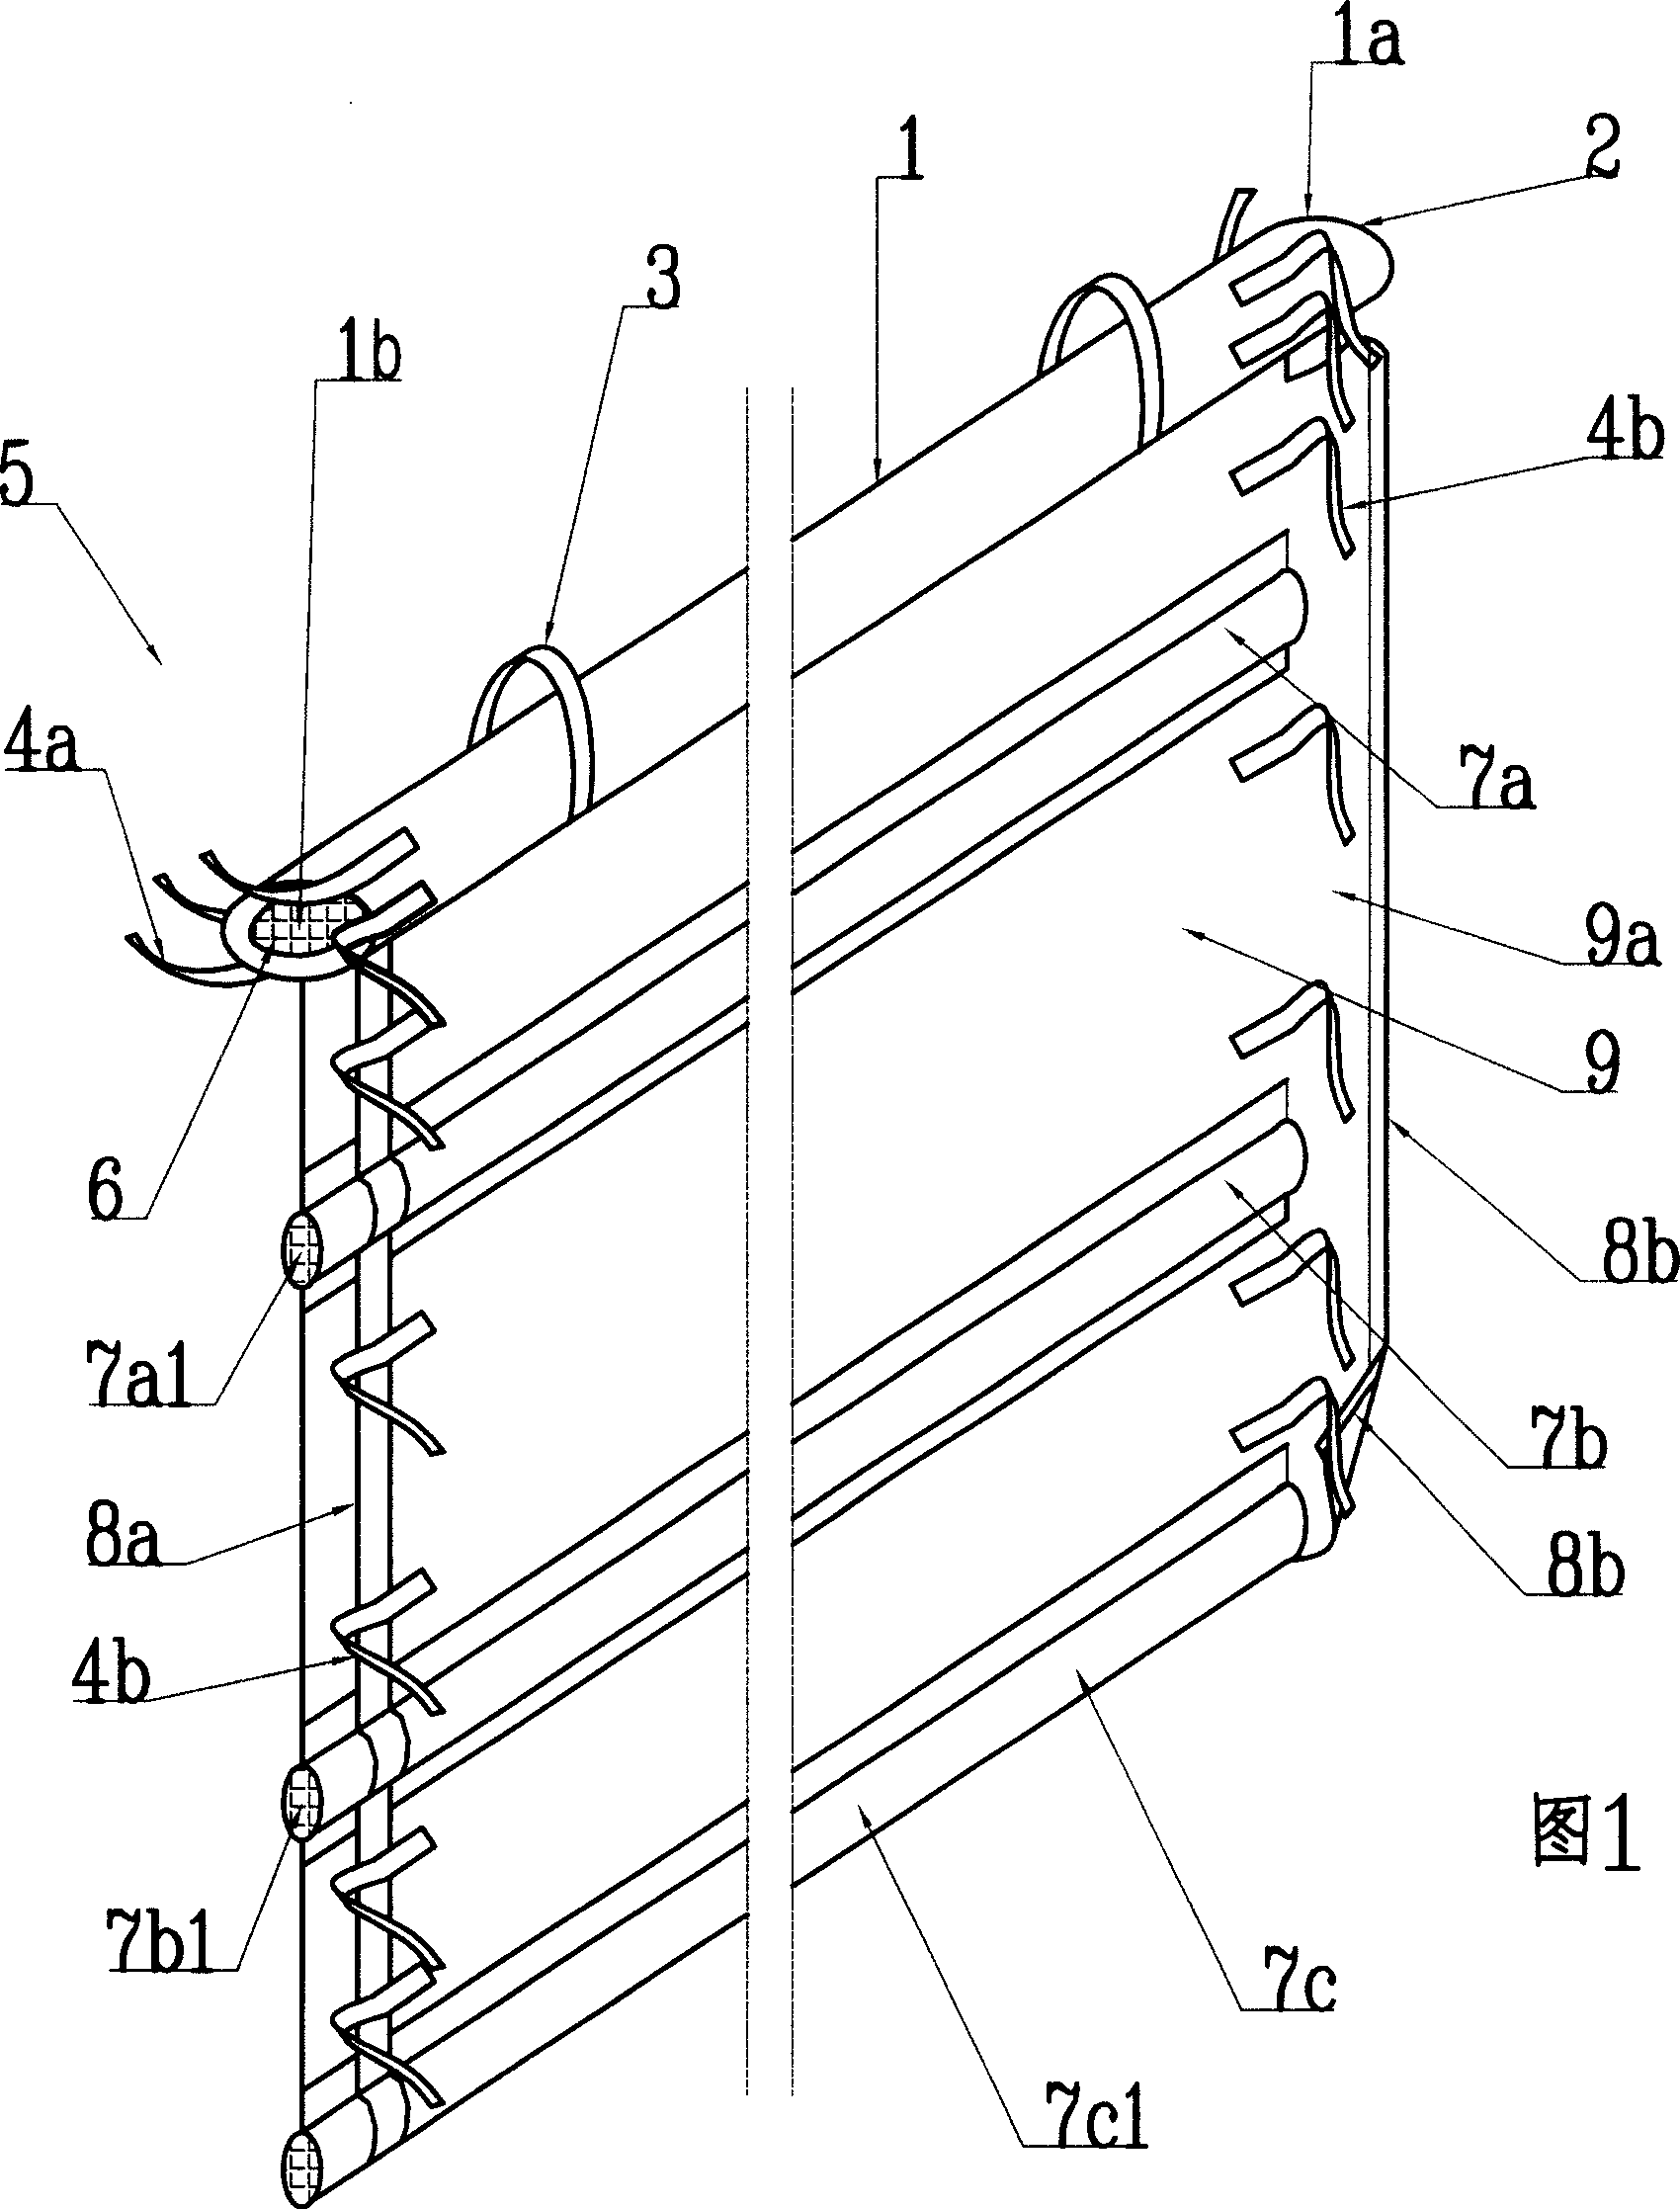 Flexible curtain wall, and aero amphibious preparation, method for continuous laying it in unlimited water area